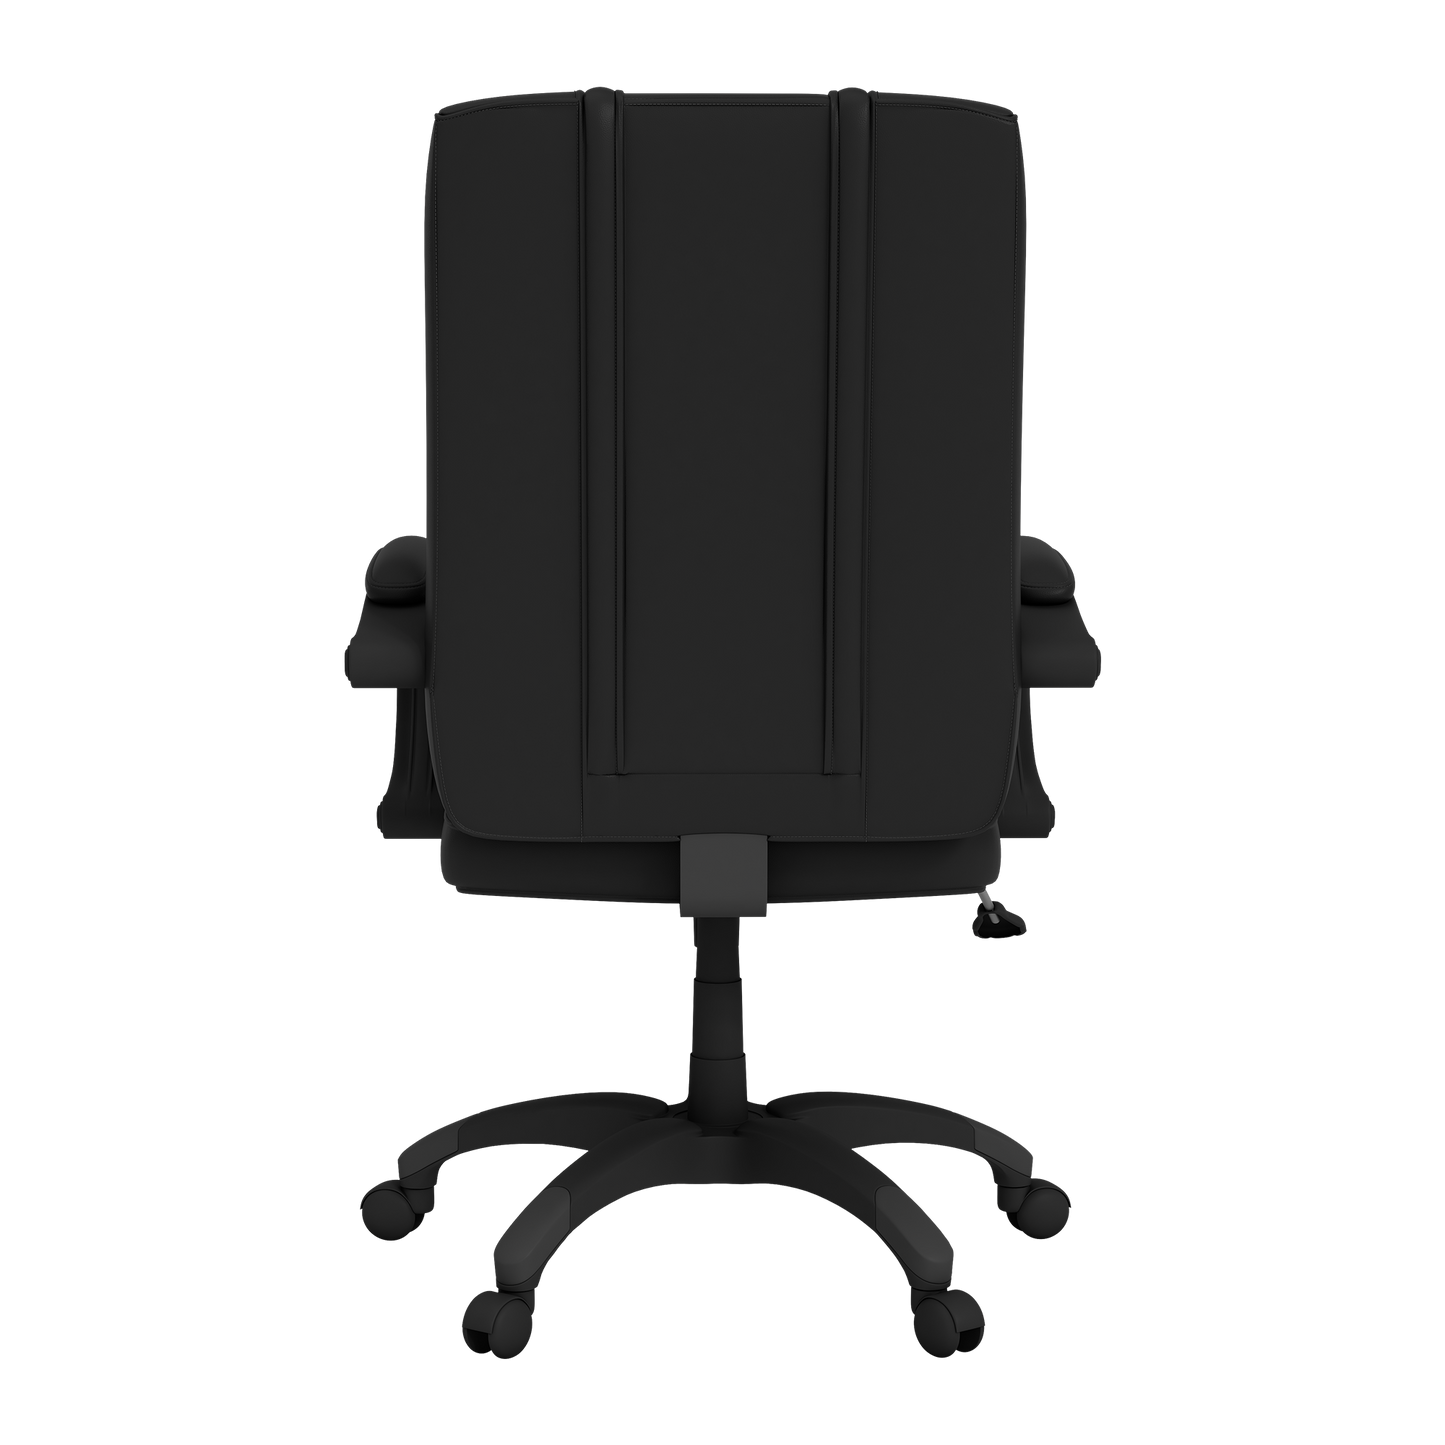 Office Chair 1000 with Washington Capitals Logo